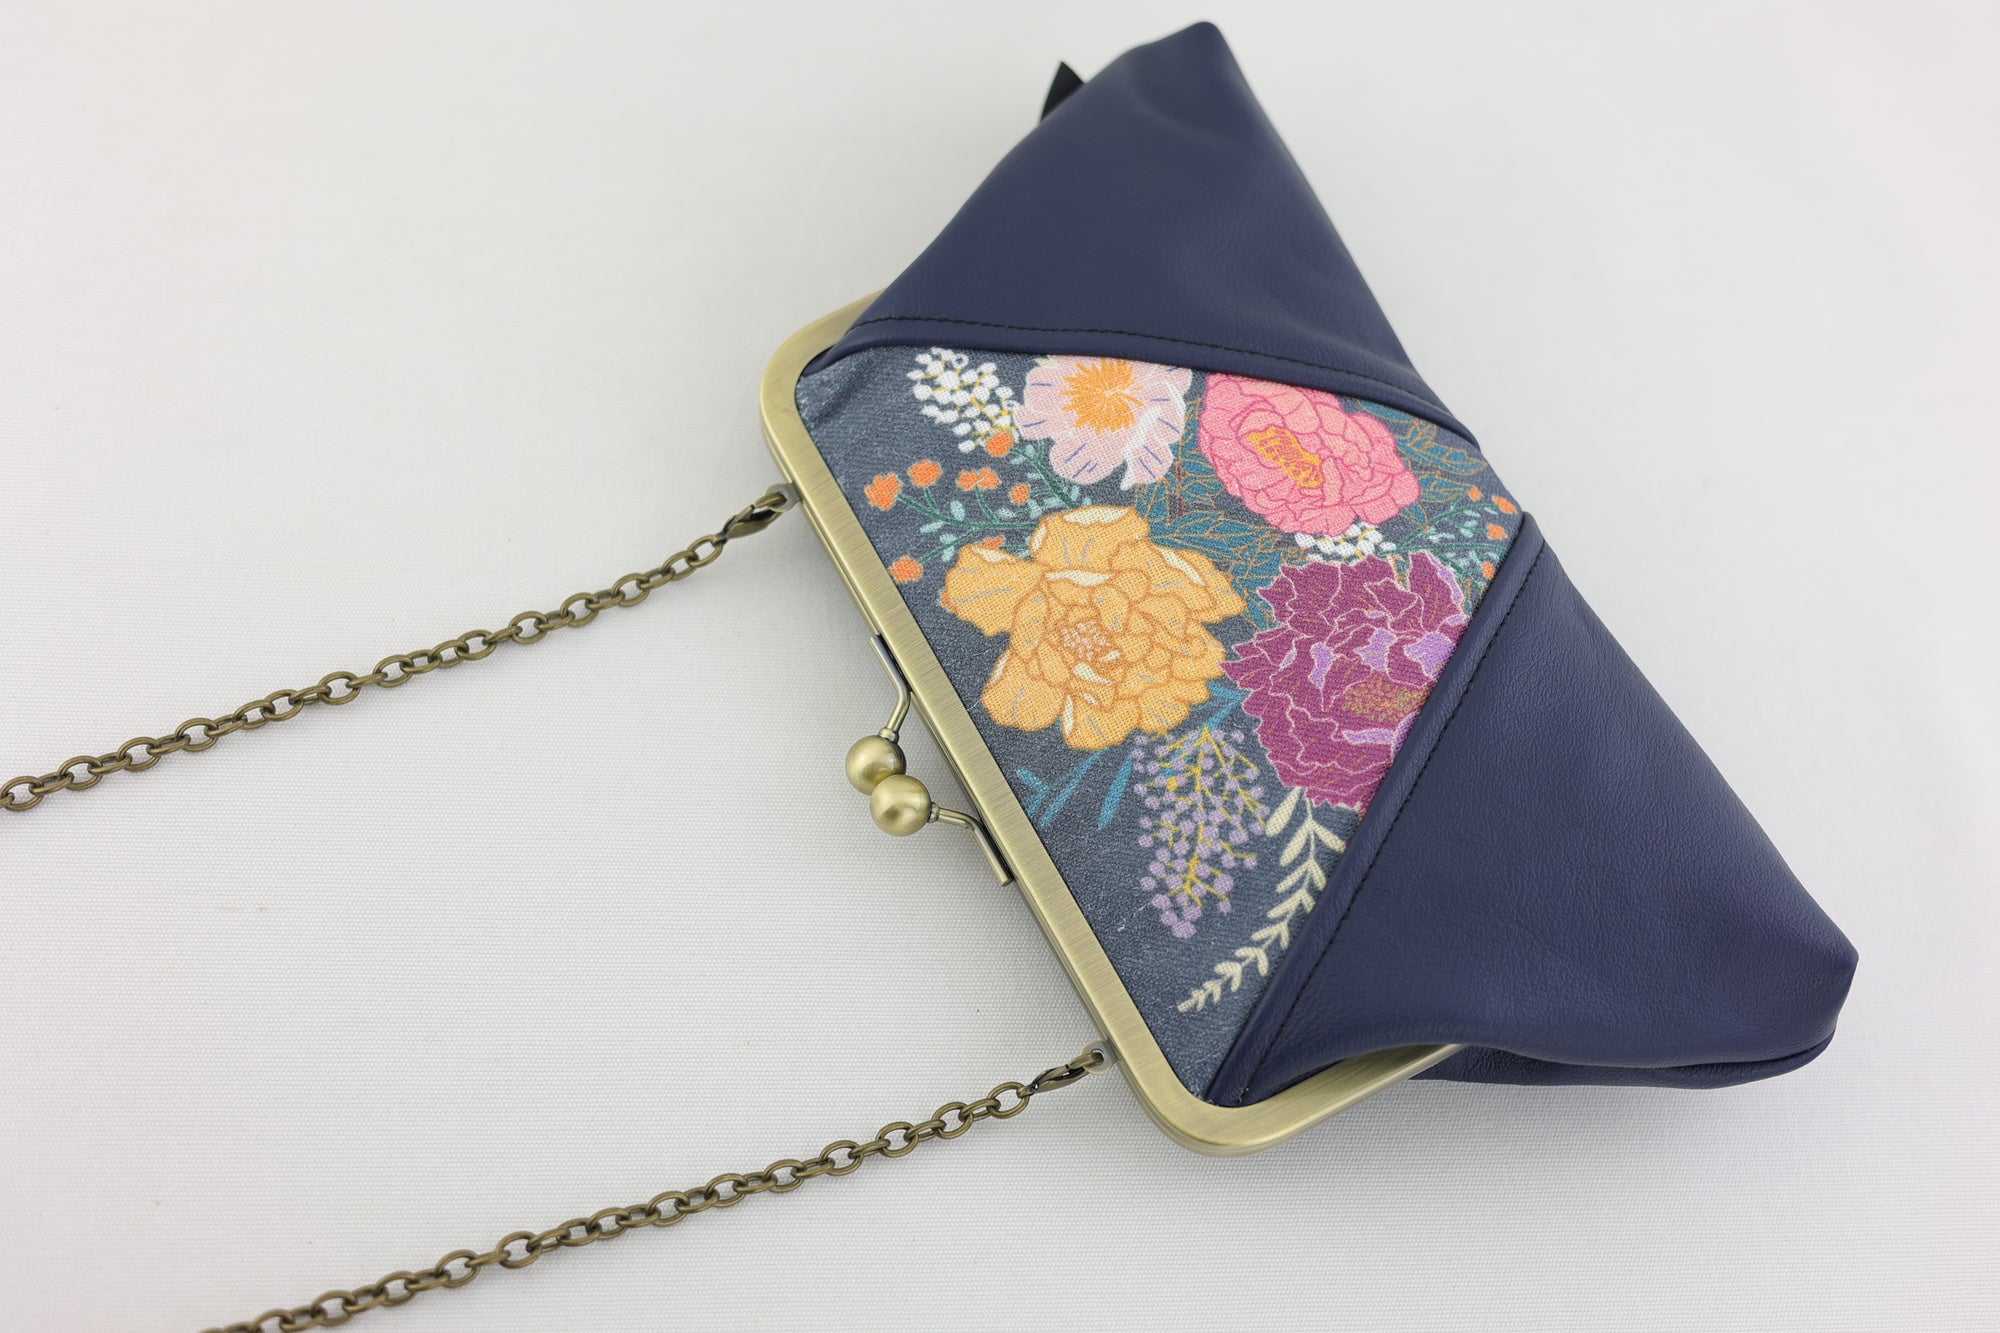 Peonies Garden Kisslock Clutch with Chain Strap | PINK OASIS